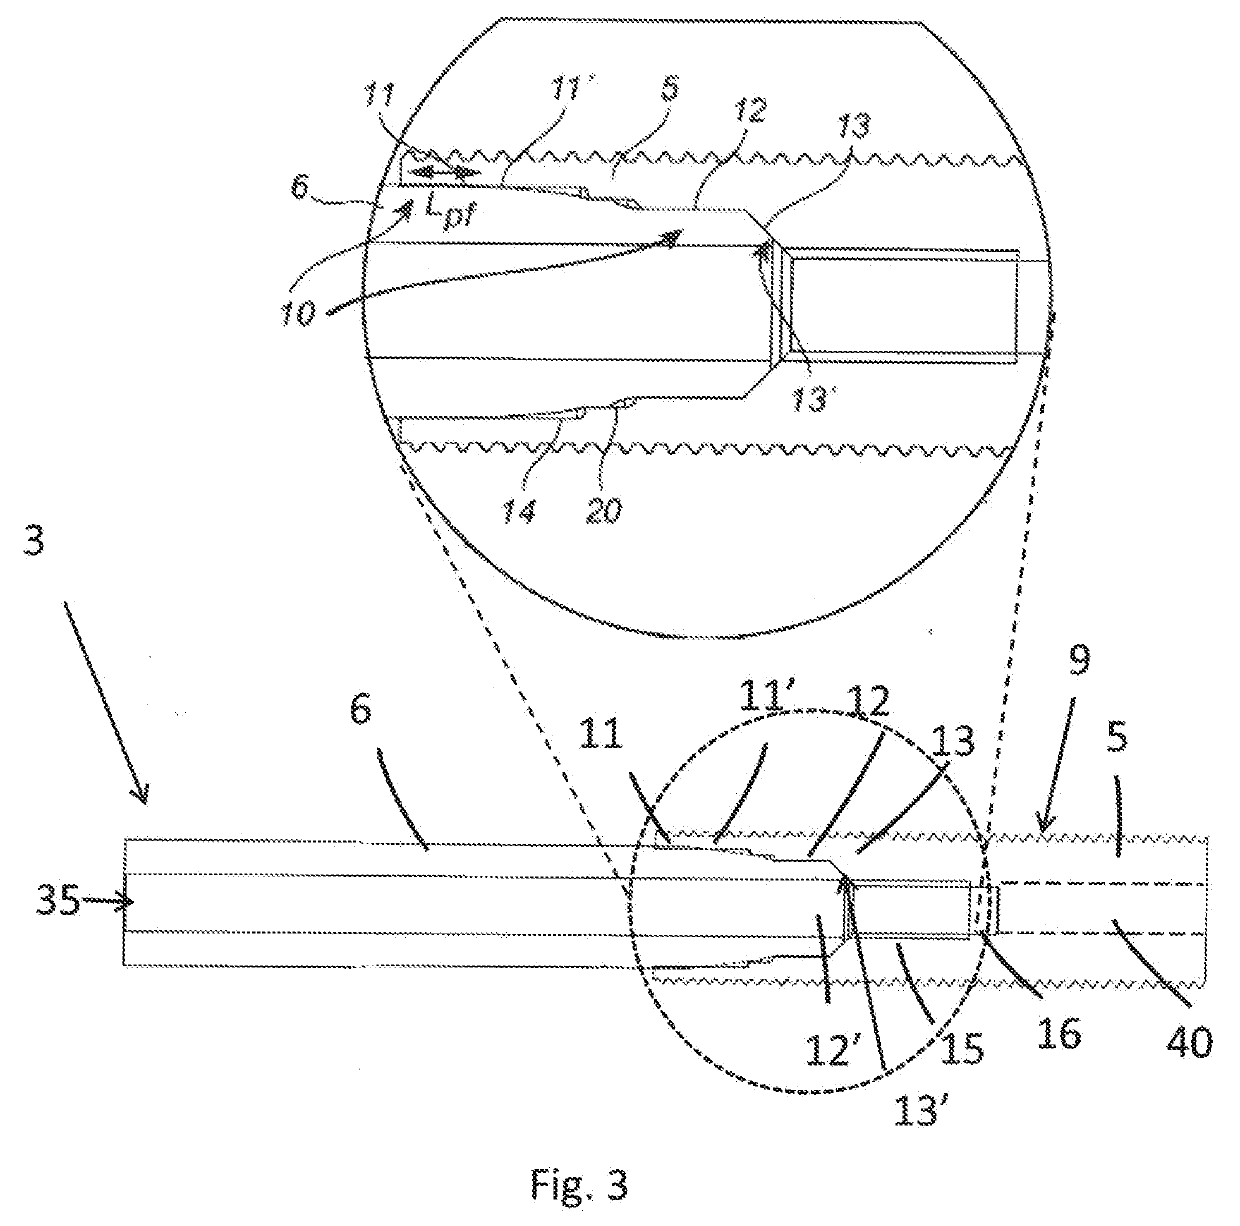 Anchoring system for attaching a prosthesis to a human body